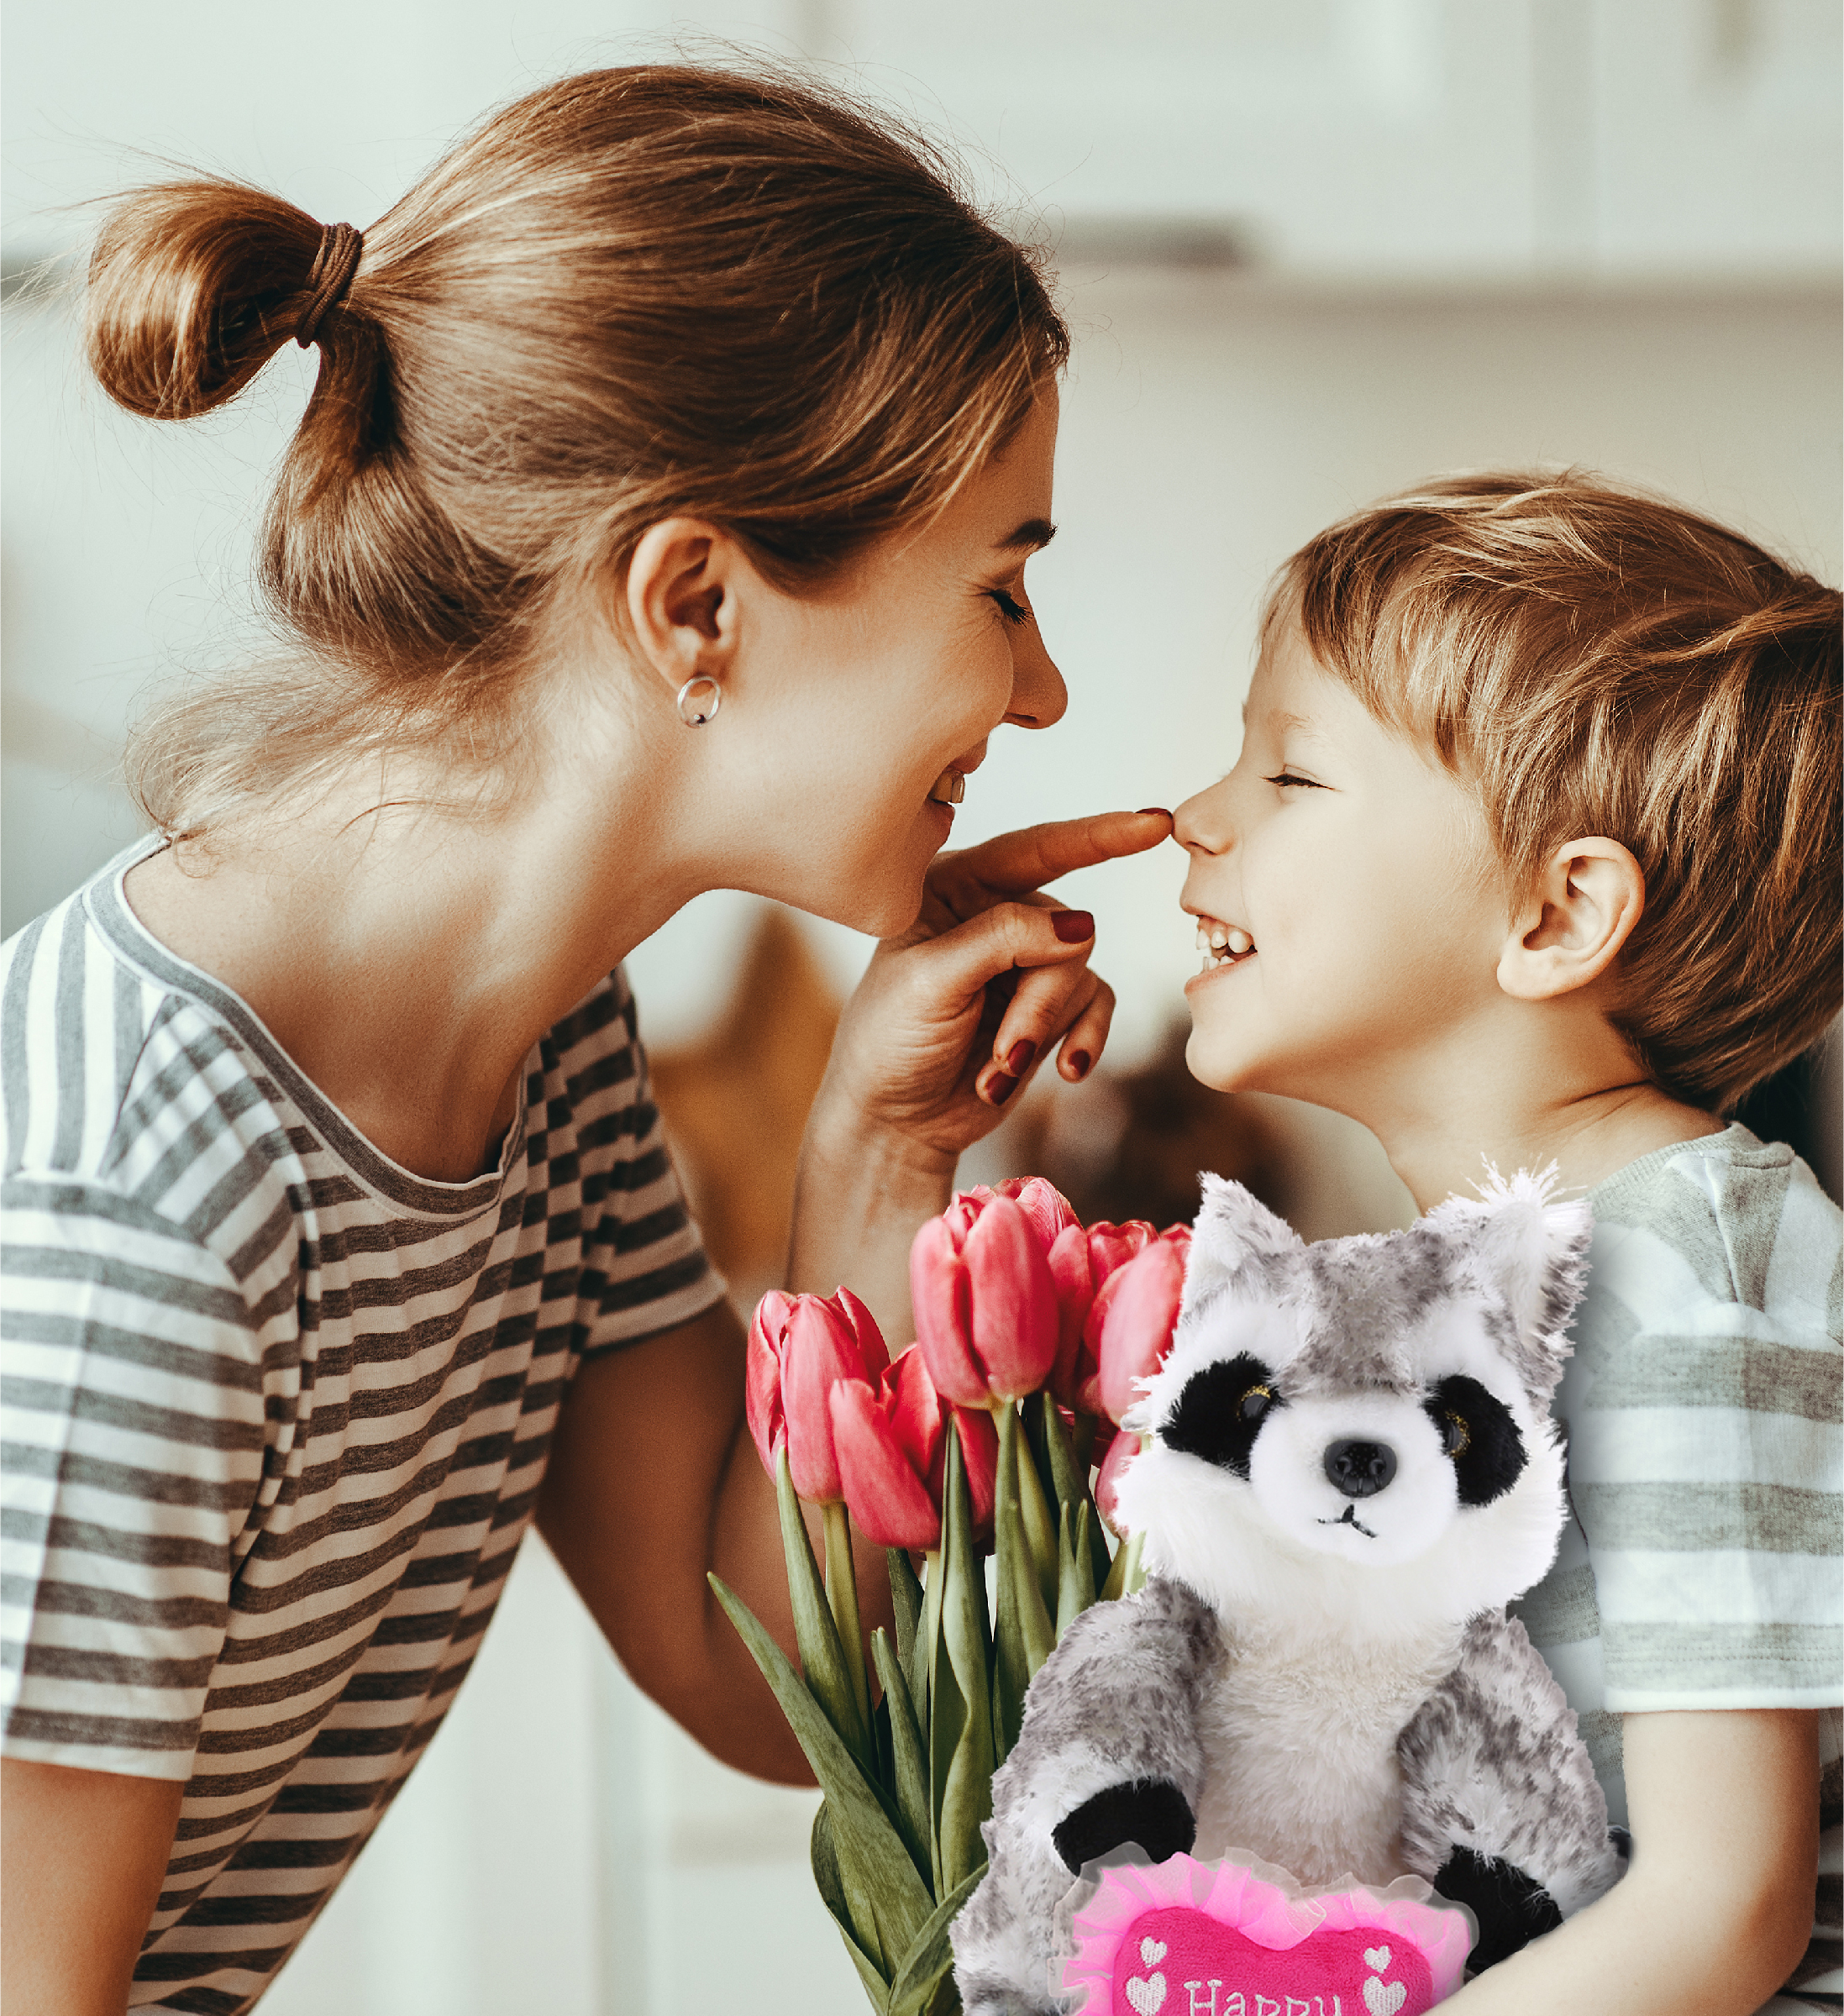 DolliBu Happy Mother's Day Super Soft Plush Raccoon Figure – Cute Stuffed  Animal with Pink Heart Message for Best Mommy, Grandma, Wife, Daughter – Cute  Wild Life Animal Plush Toy Gift – 9″ Inches - DolliBu